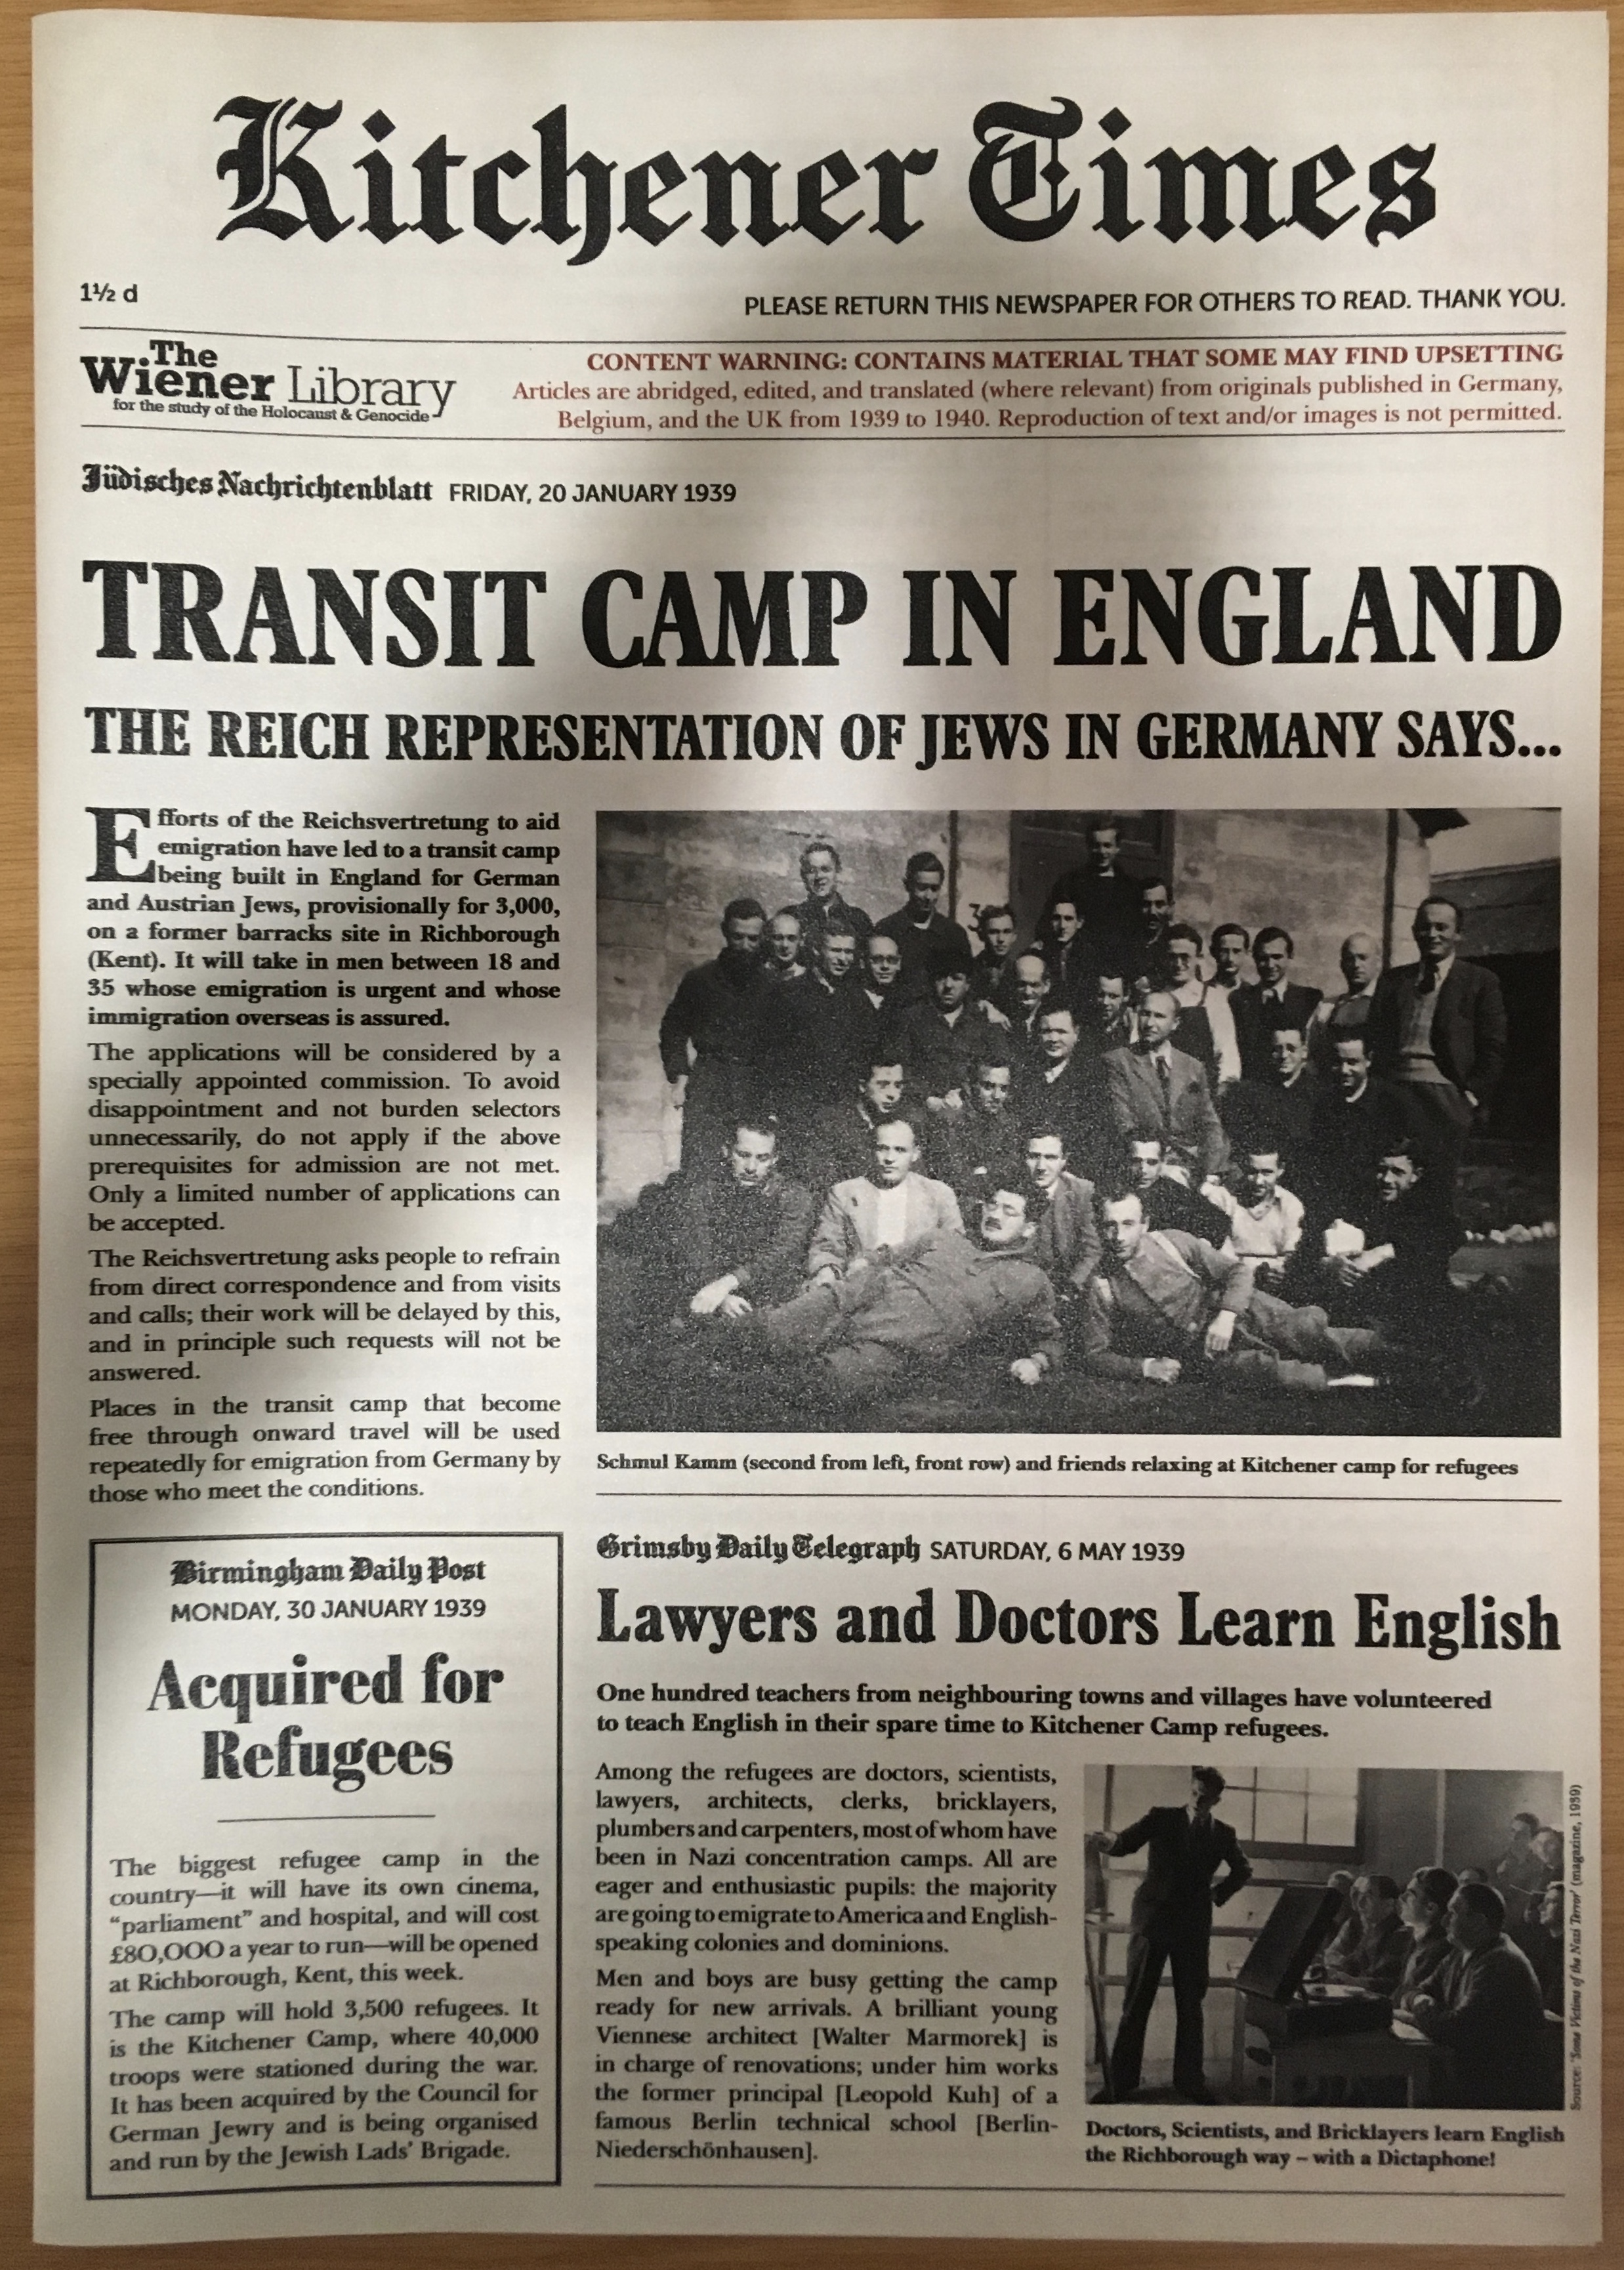 Leave to Land - The Kitchener News, page 1